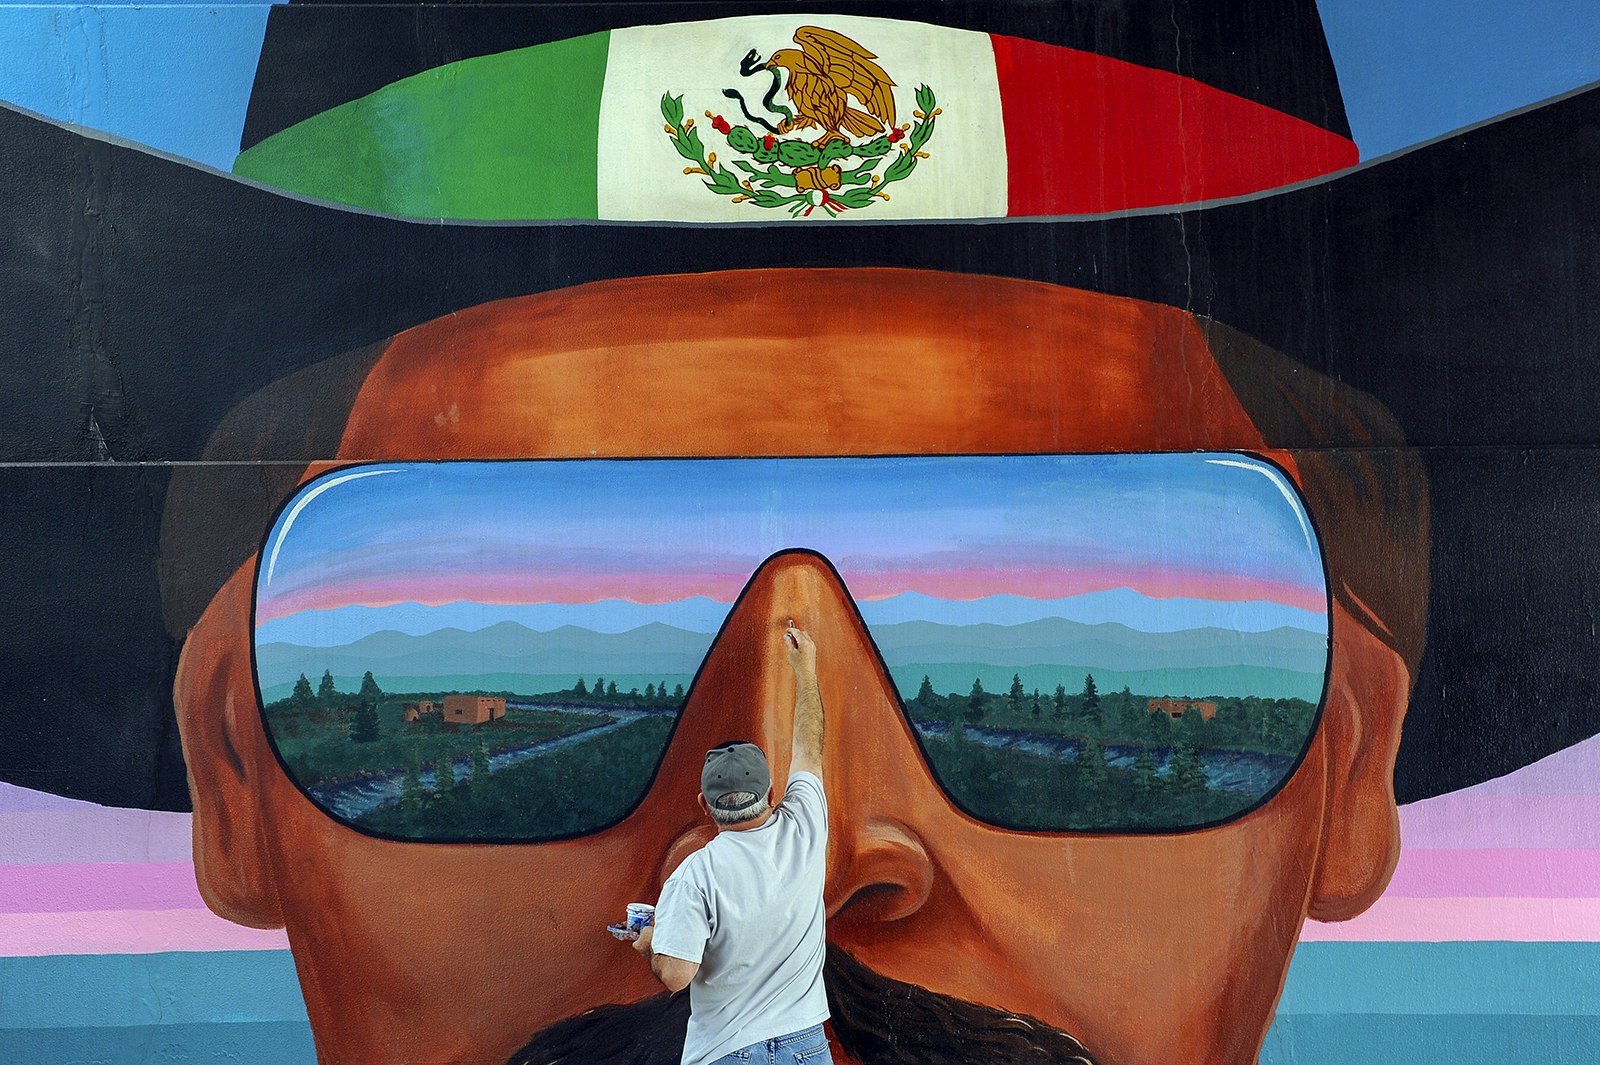 An artist touches up a mural depicting a man wearing a cowboy hat with the Mexican flag on its band and sunglasses reflecting Colorado scenery. Denver, Colorado.